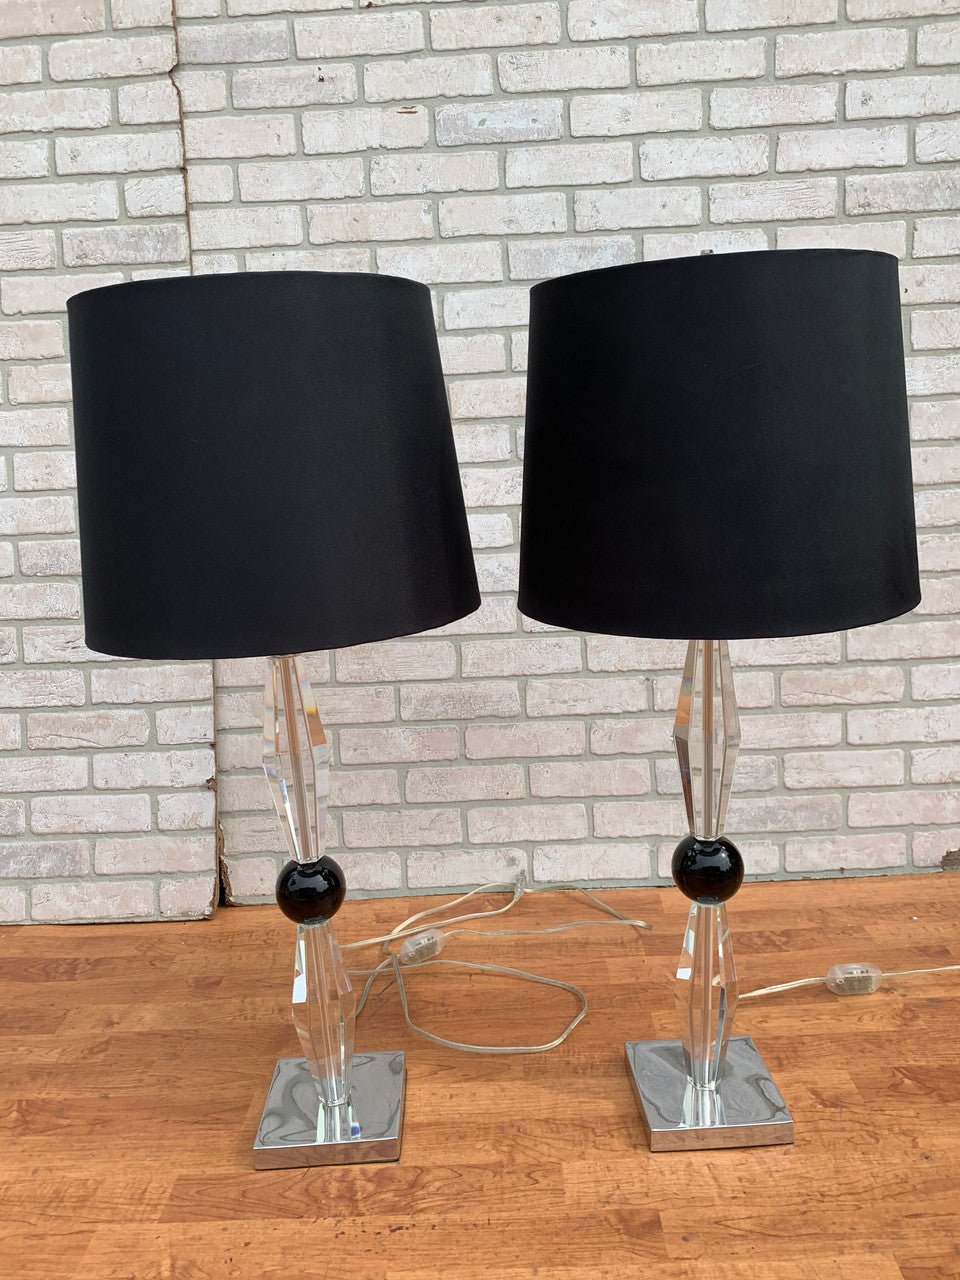 Crystal and Lacquer Ball Table Lamps with Black Shades - Pair